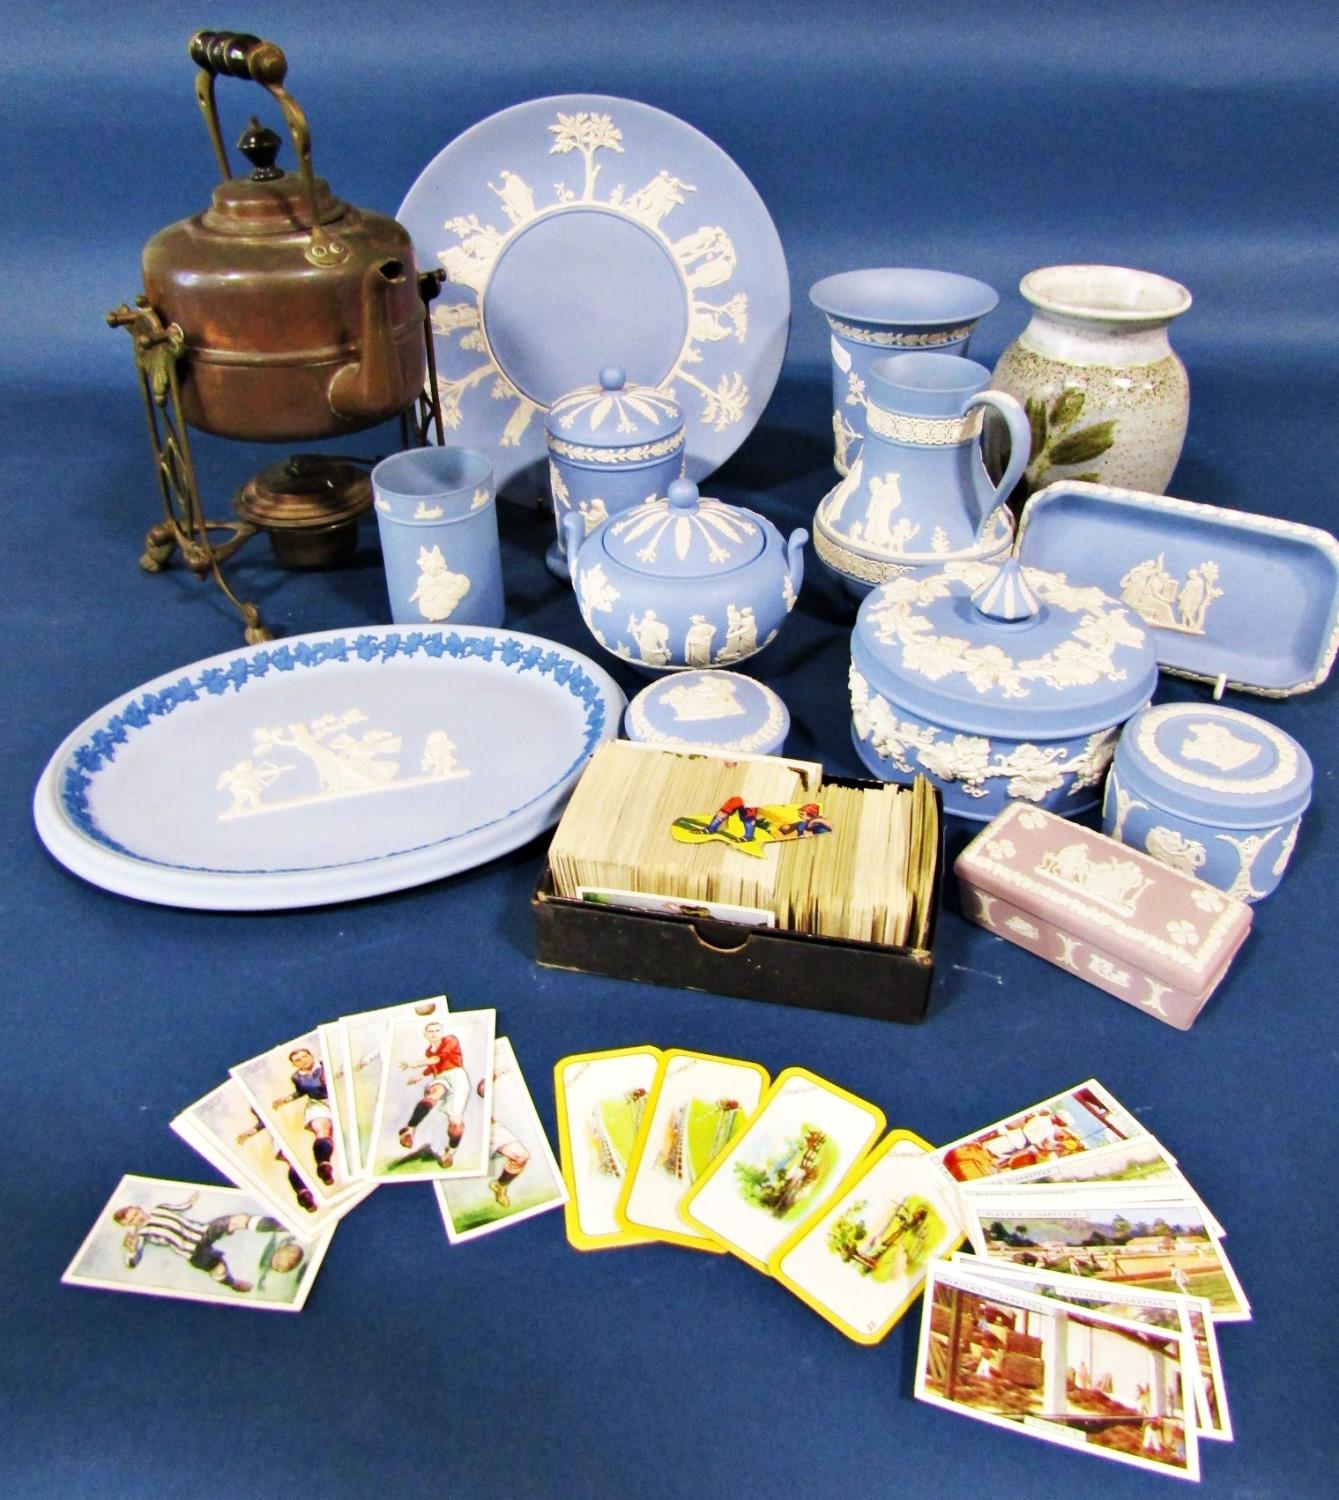 A collection of Wedgwood Blue Jasperware dishes, jugs, bowls, etc, Victorian copper spirit kettle